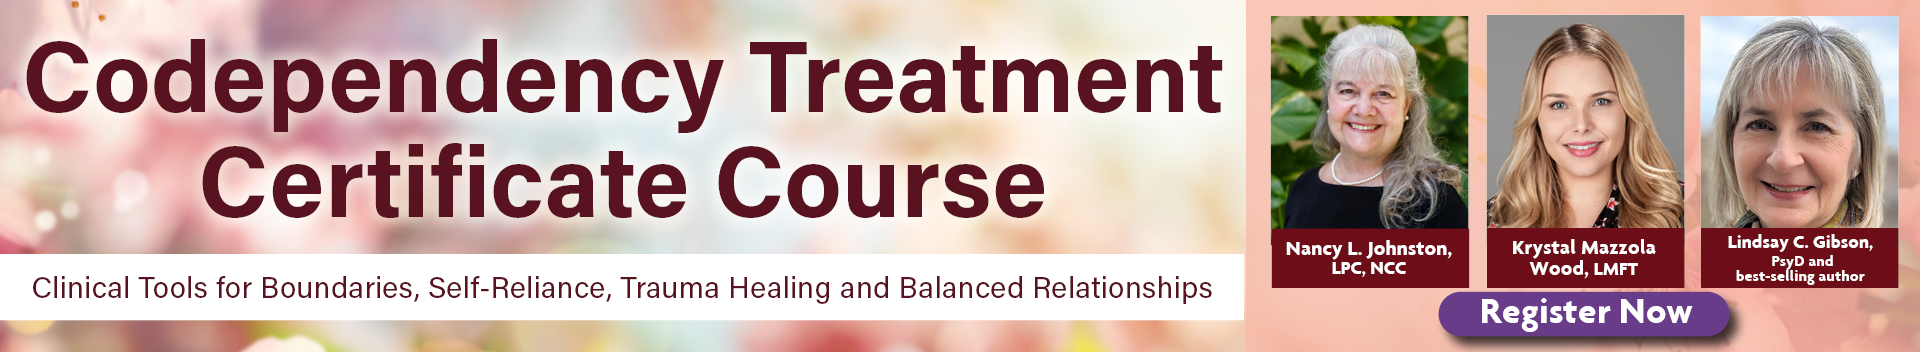 Codependency Treatment Certificate Course: Clinical Tools for Boundaries, Self-Reliance, Trauma Healing, and Balanced Relationships